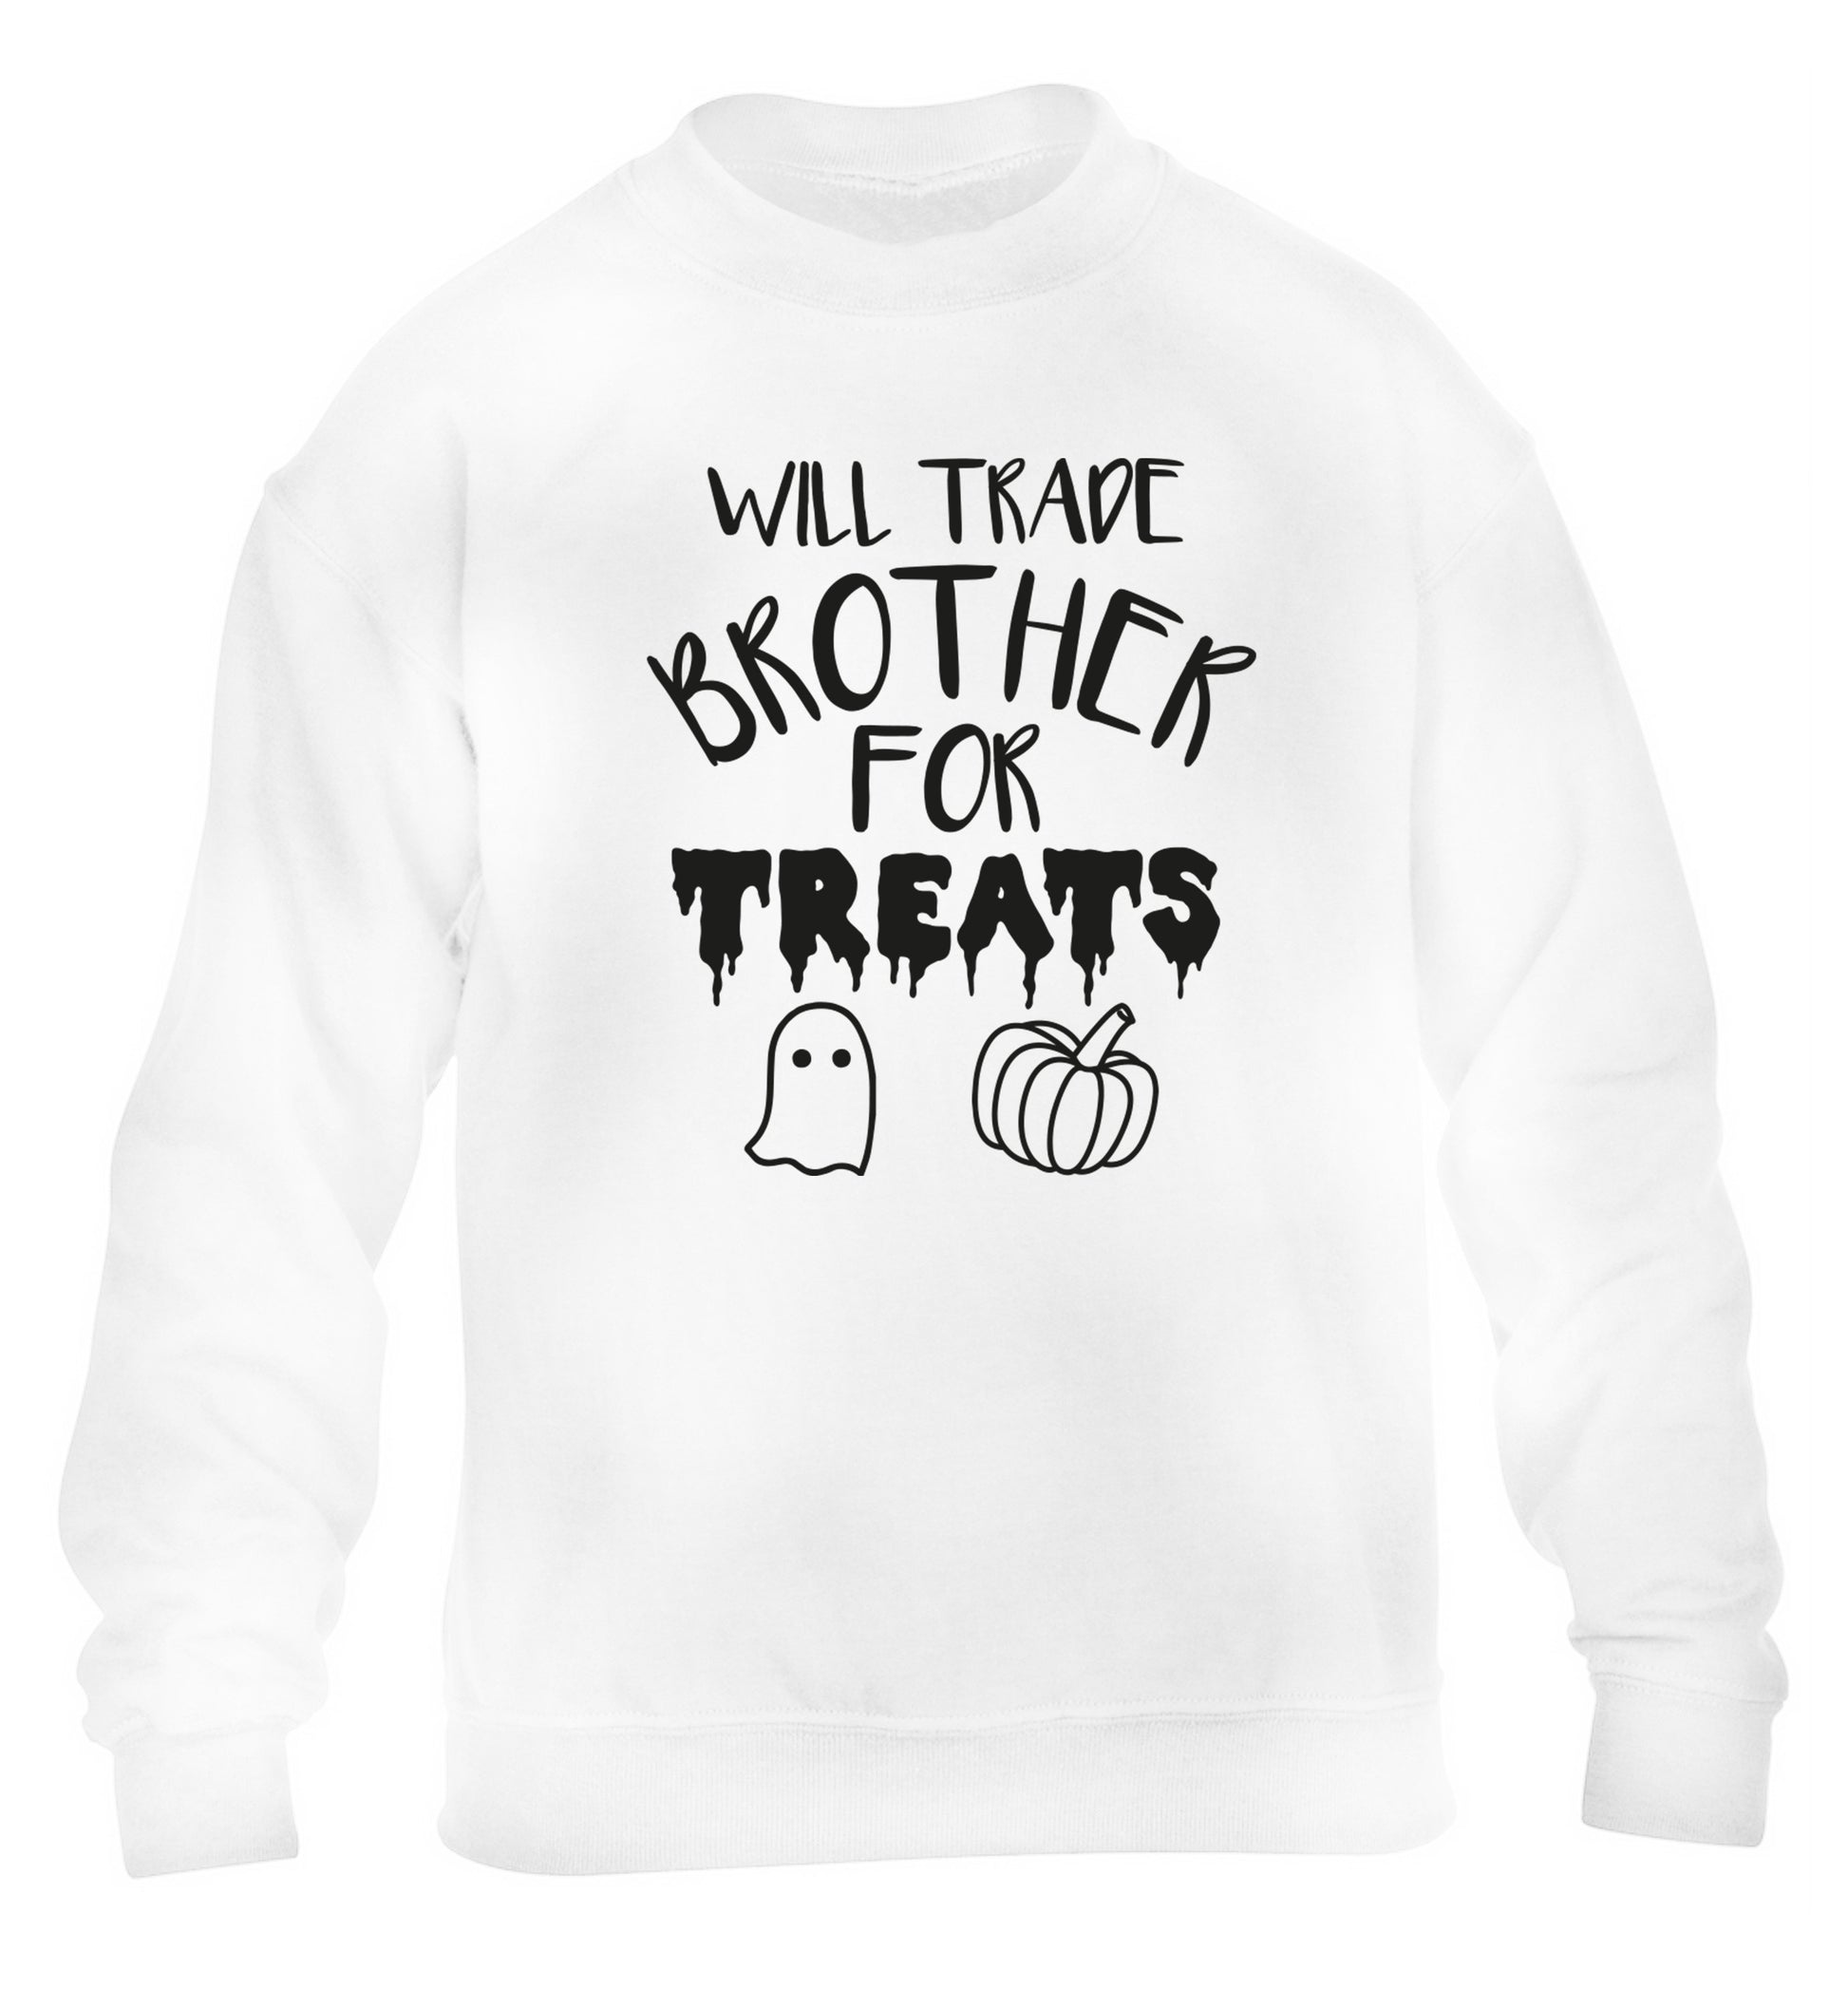 Will trade brother for treats children's white sweater 12-14 Years